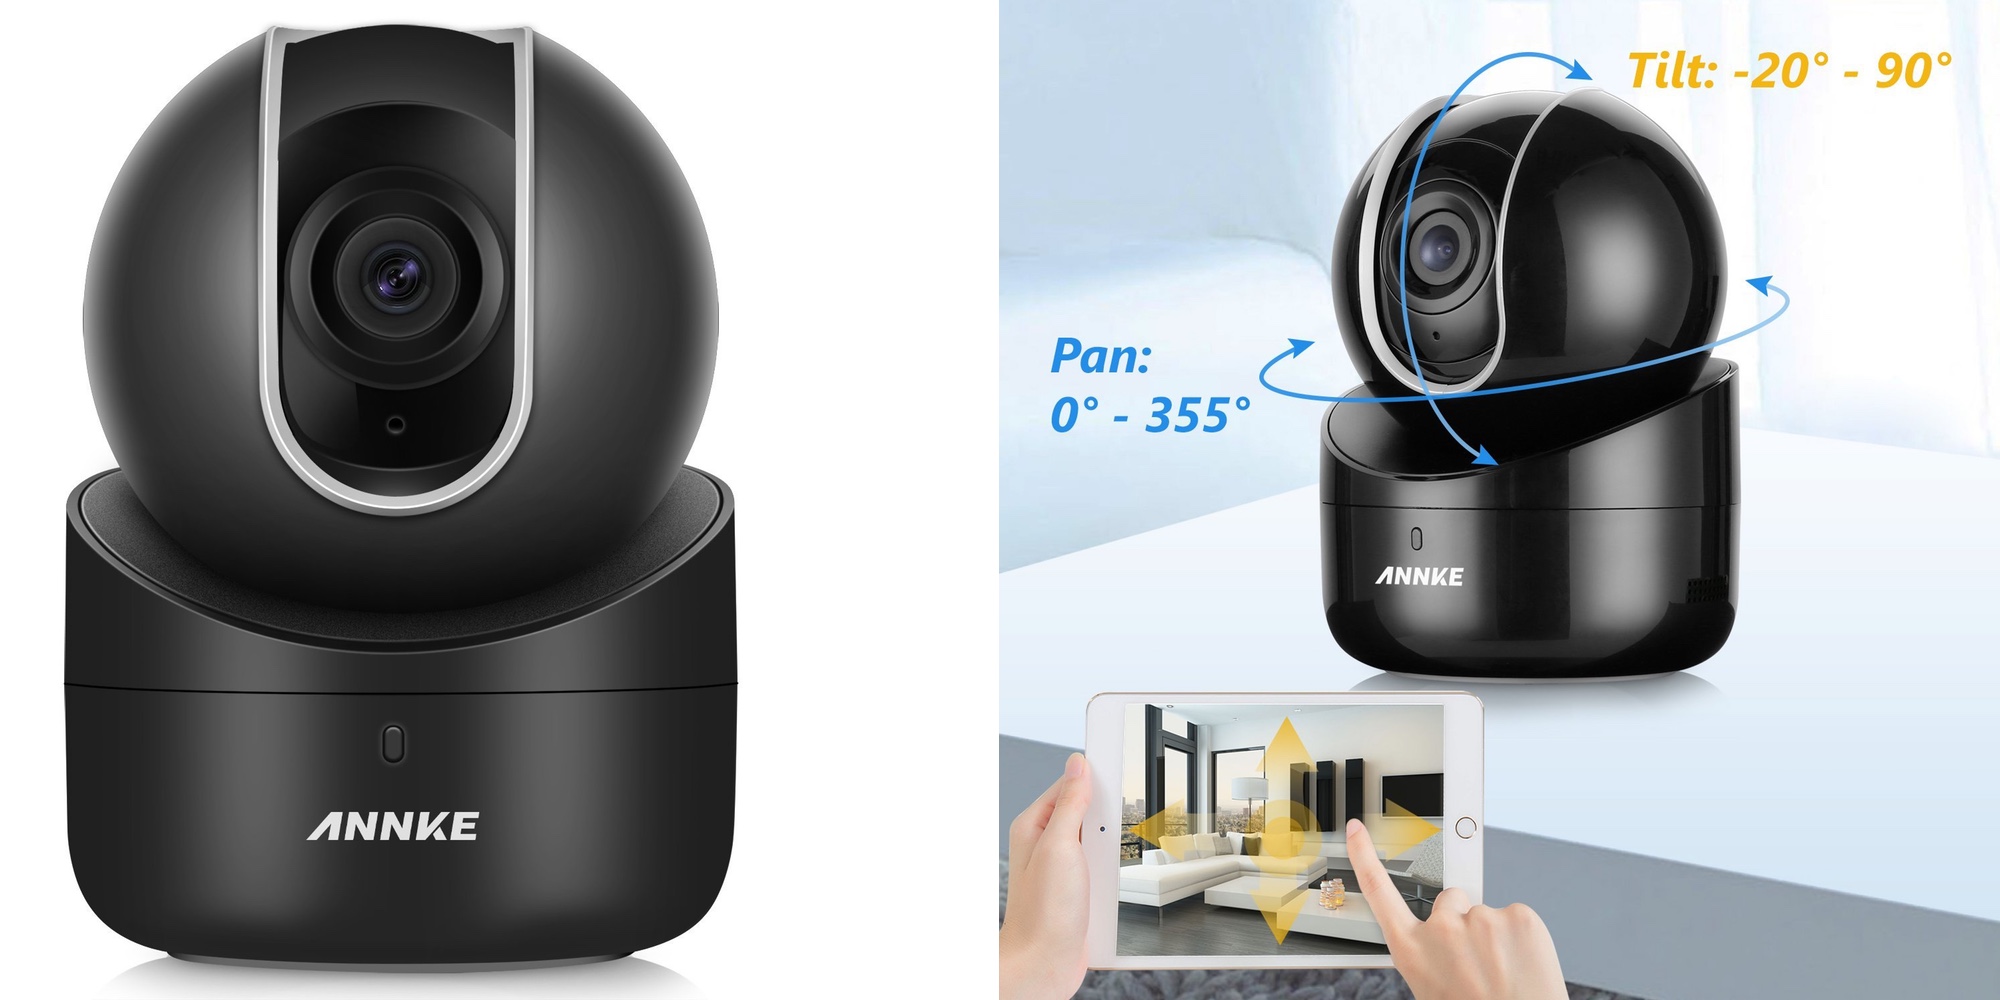 Keep An Eye On Your Home With The Annke 720p Wireless Security Camera For 40 9to5toys